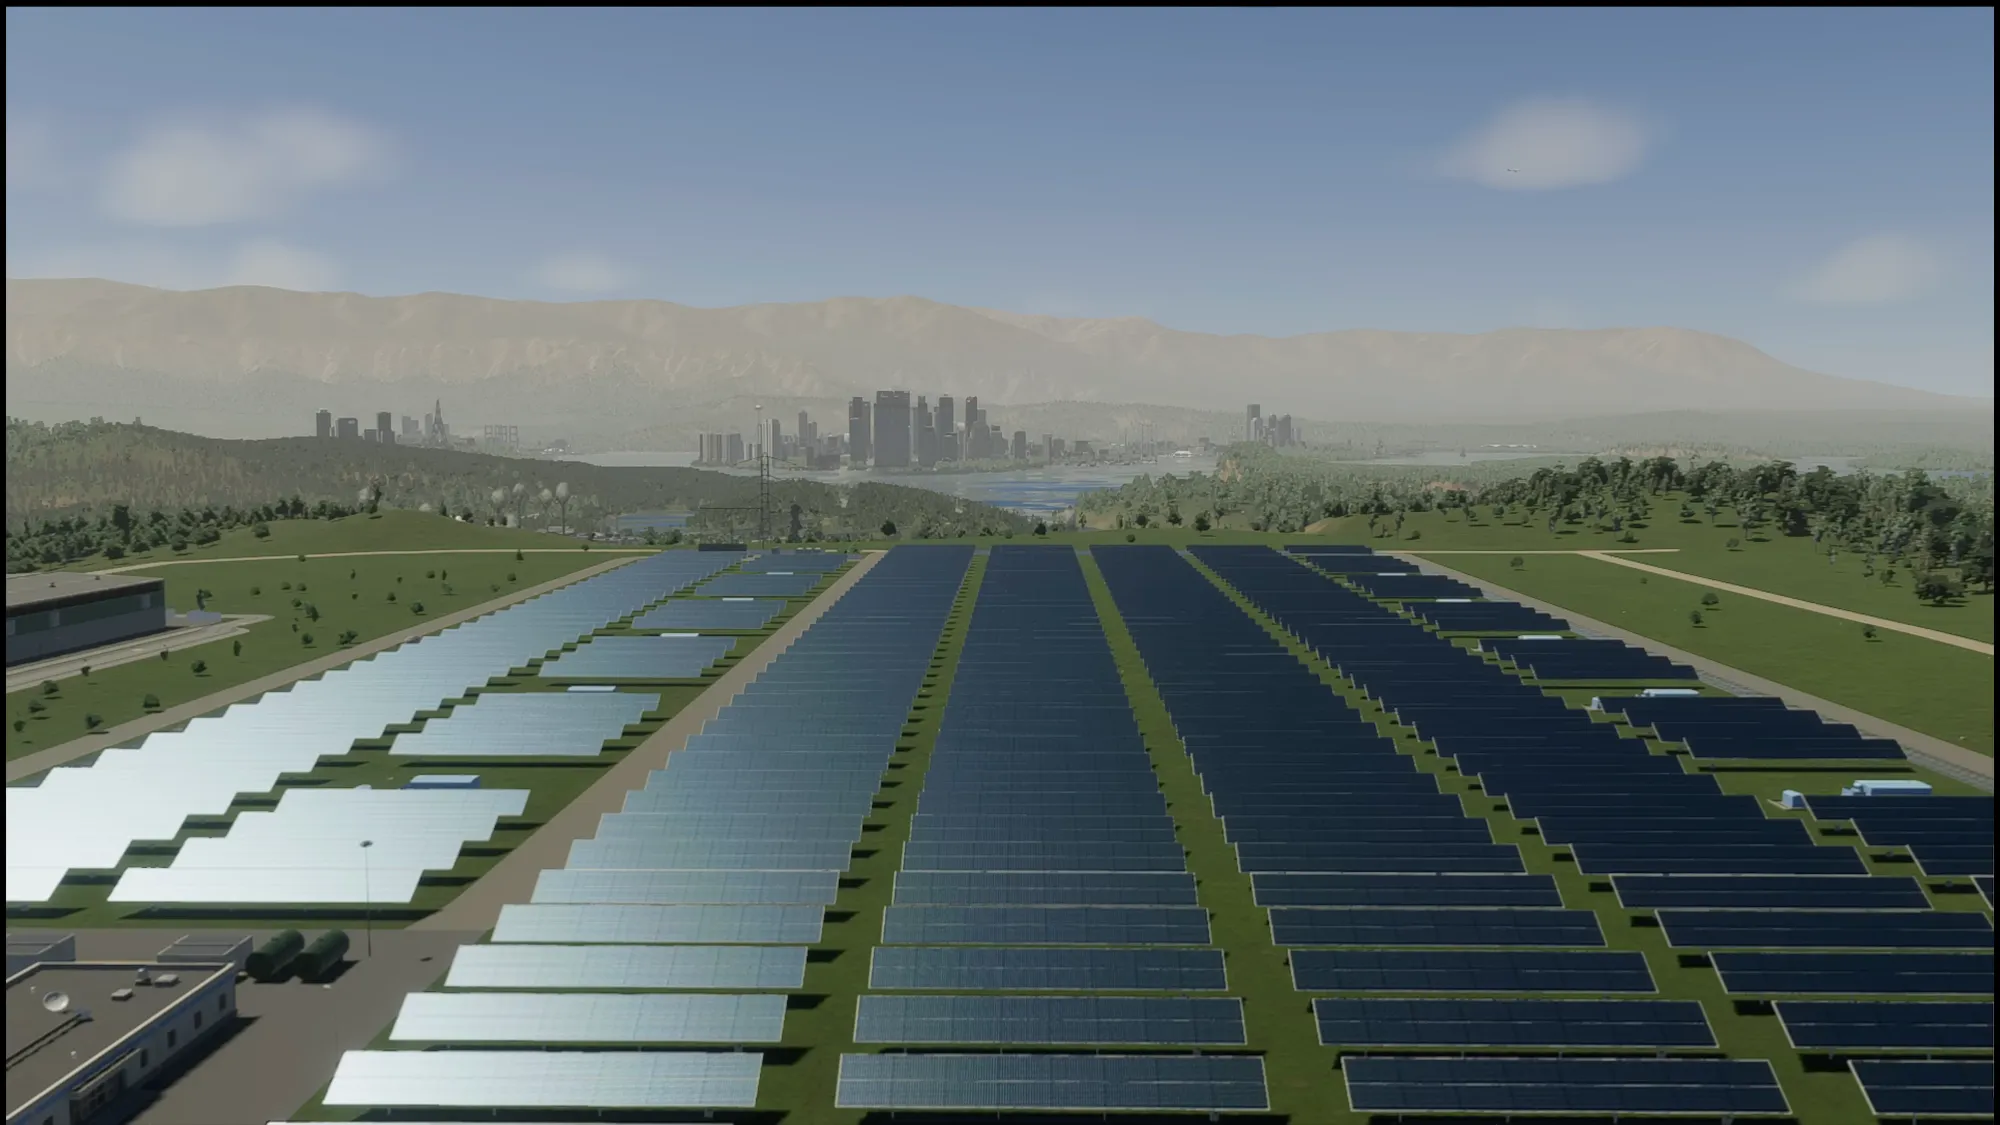 Solar farms are realistic in size and layout